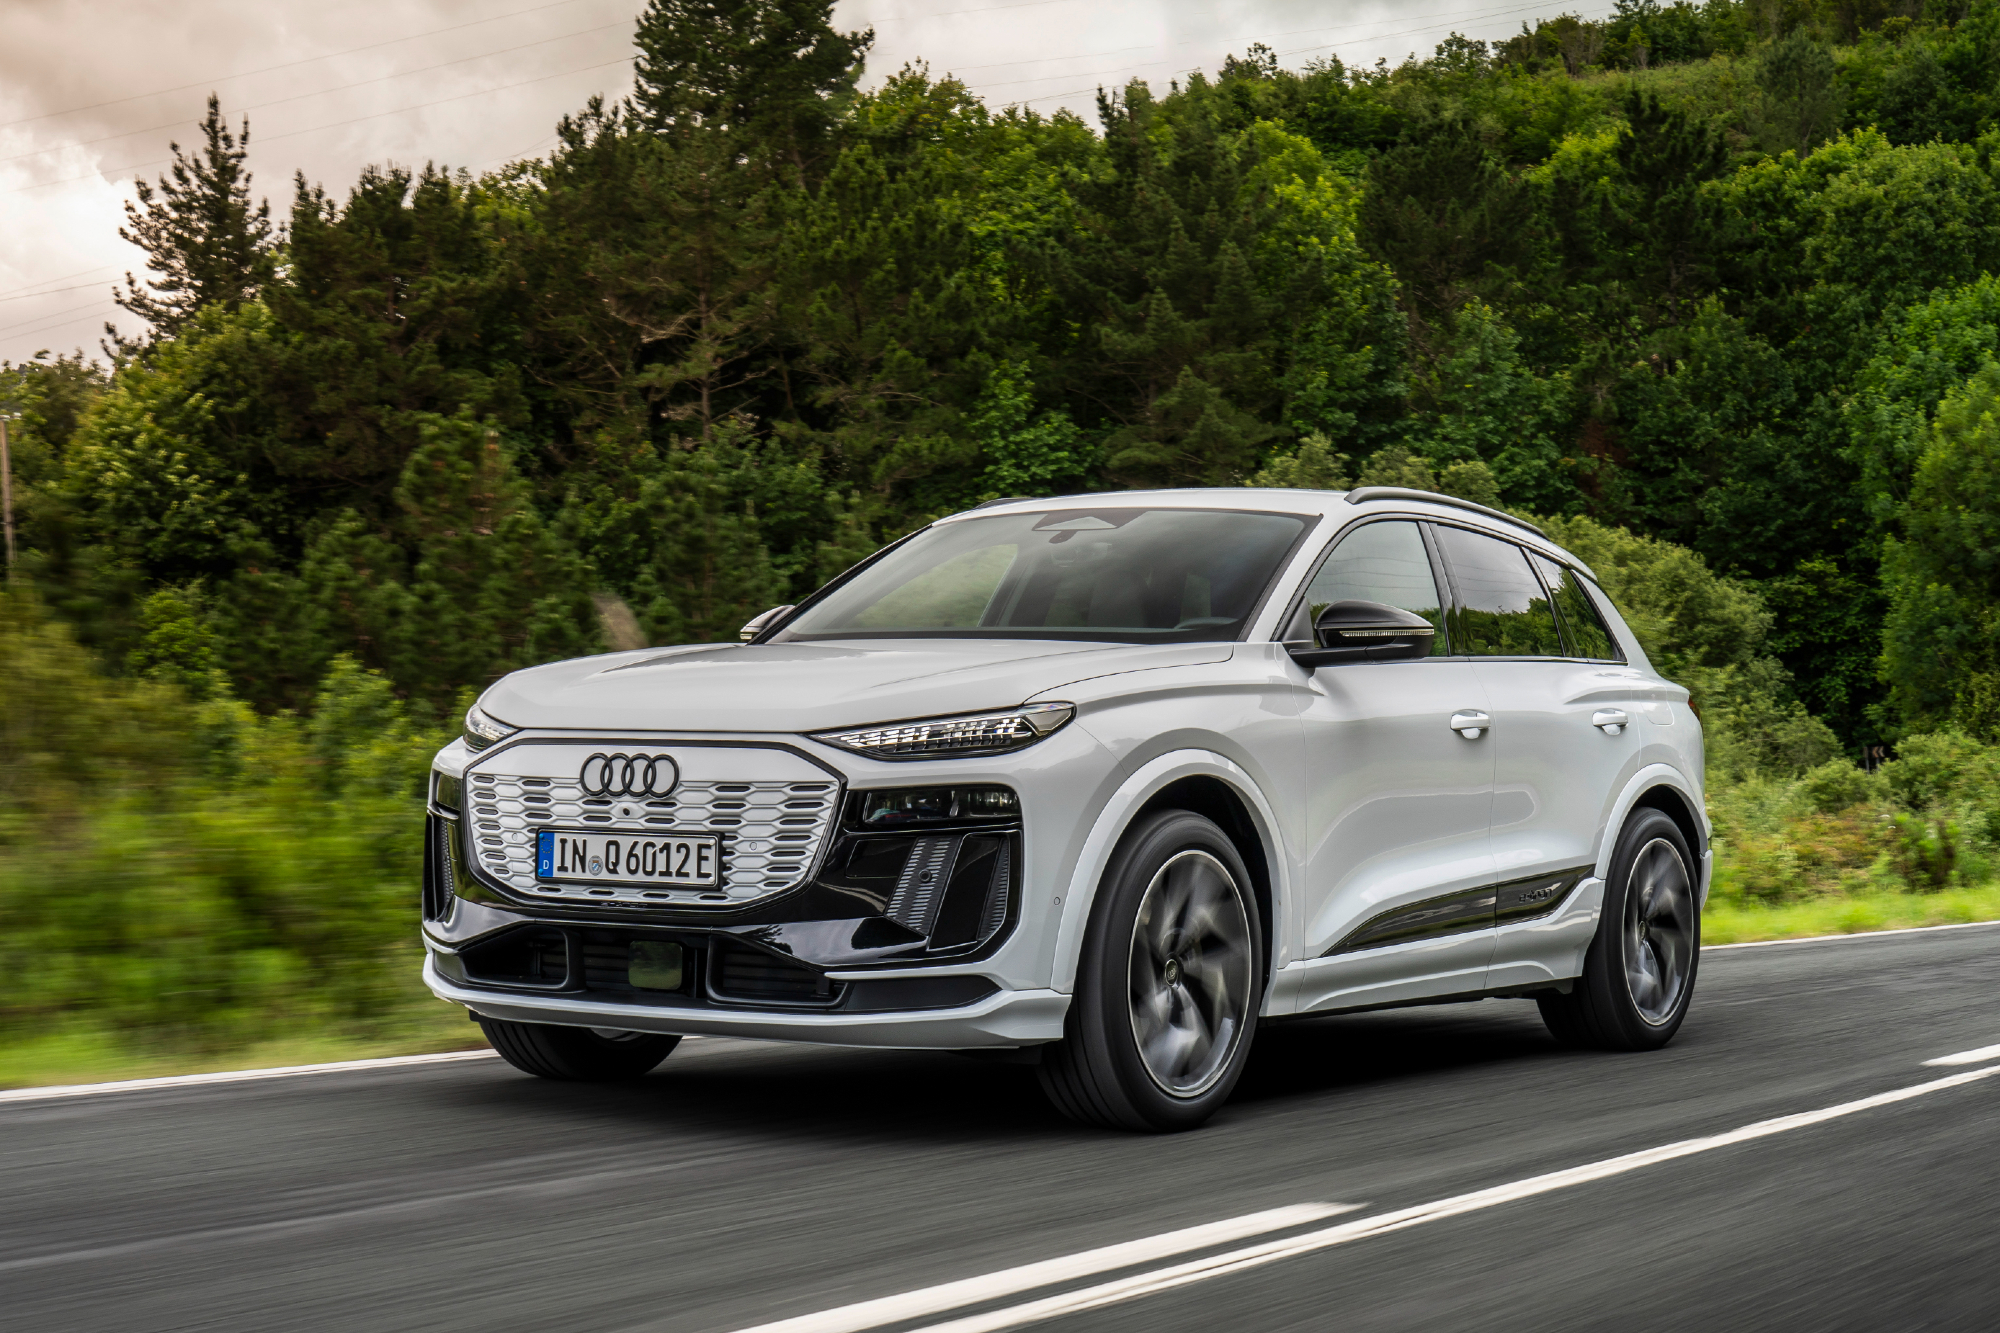 2025 Audi Q6 e-tron European model driving on a highway with forest in the background.